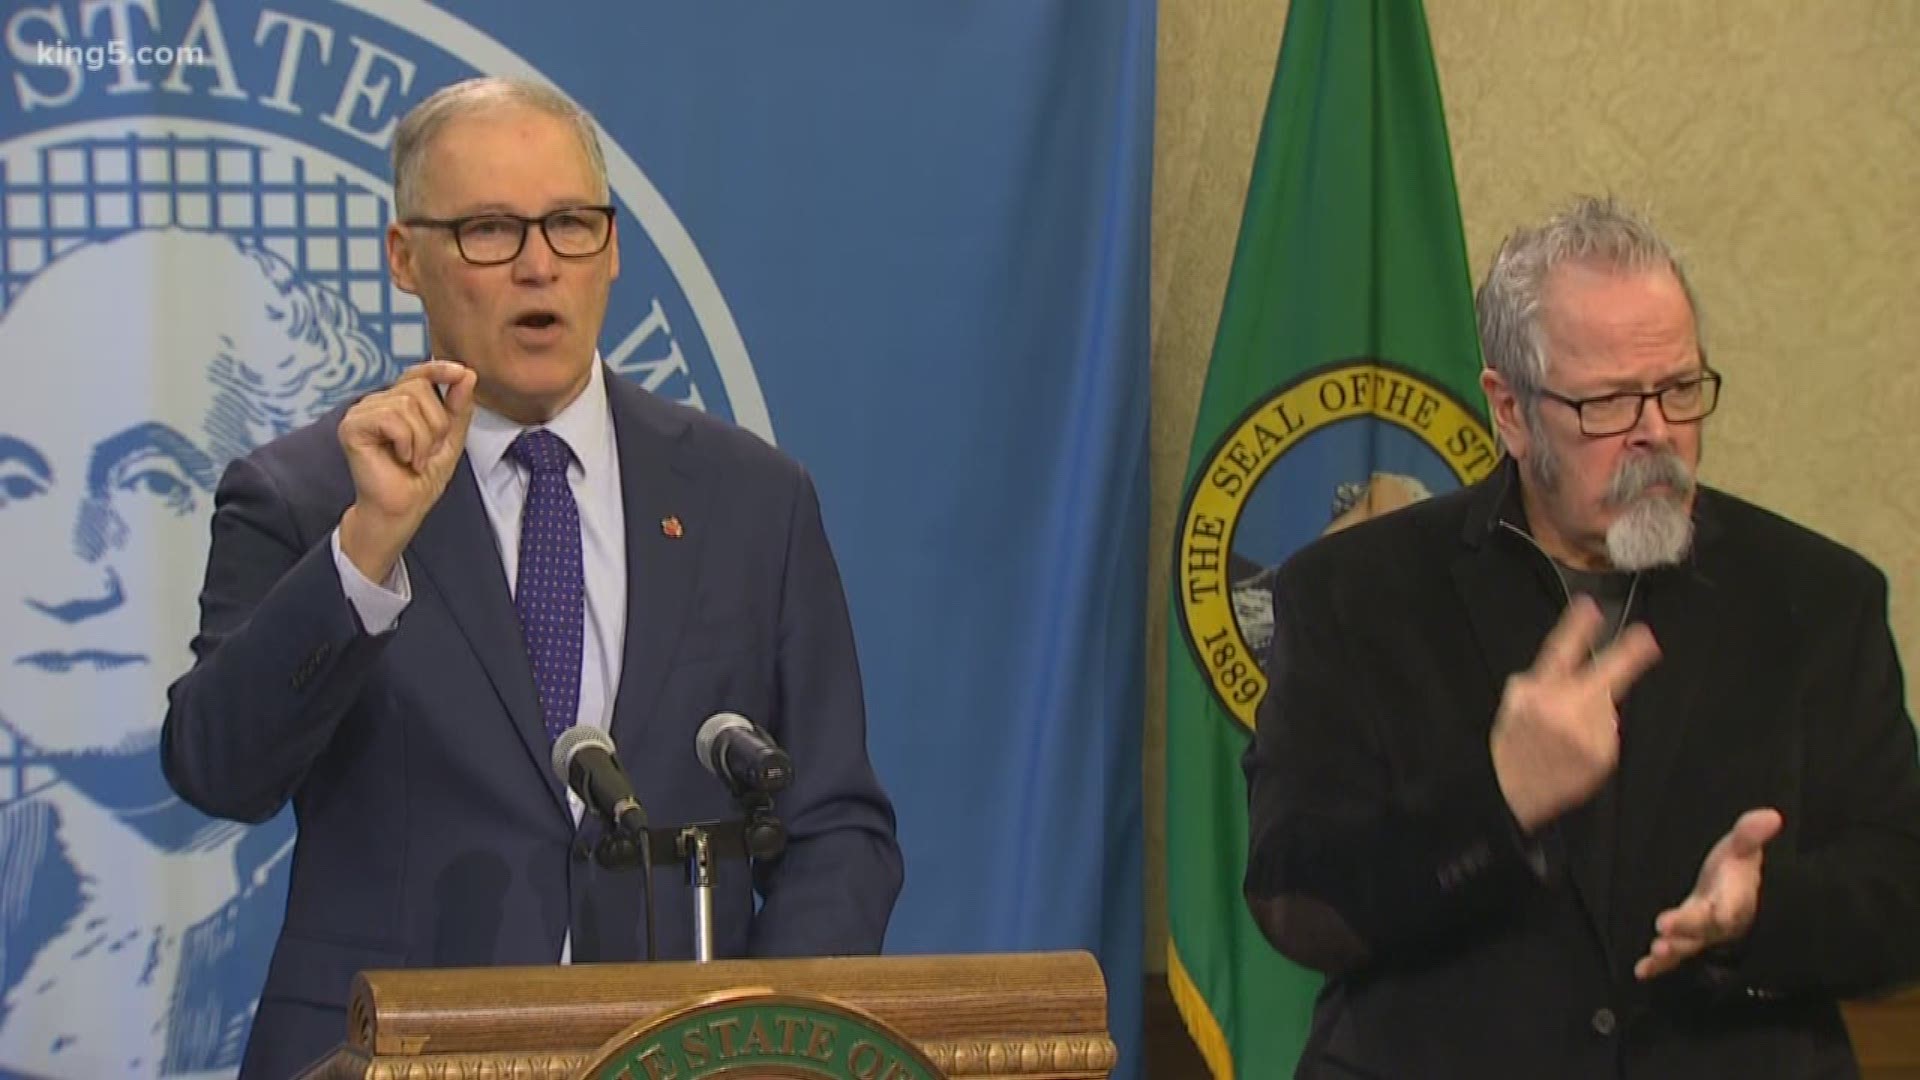 Washington Gov. Jay Inslee has not canceled public events yet, but he said that could change soon.